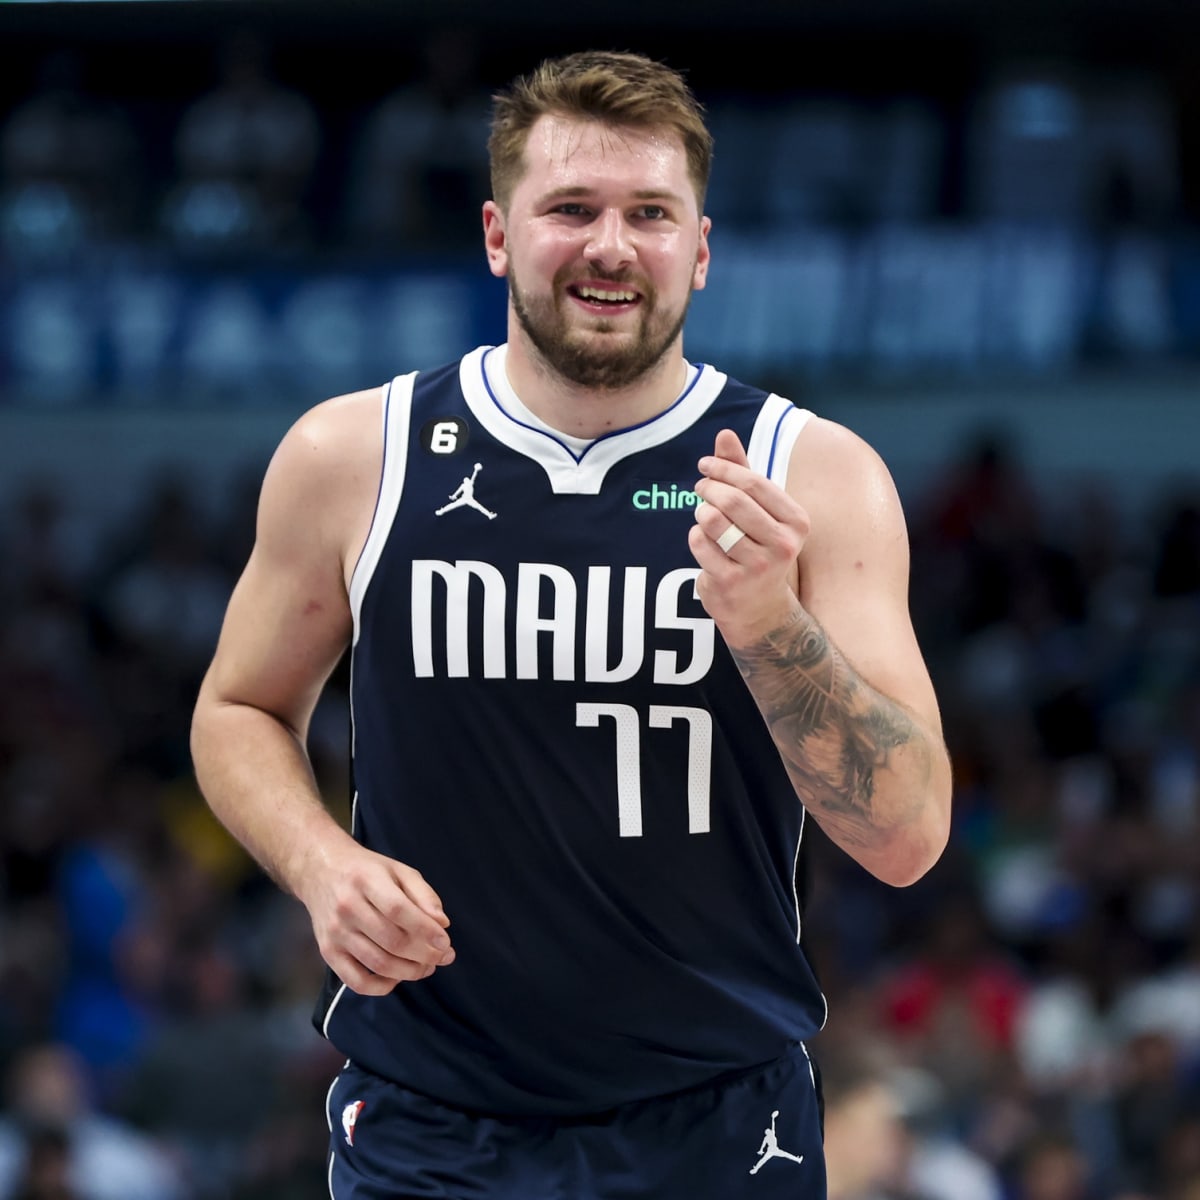 Luka's doing magic': How Dallas discovered its next superstar a world away  - The Athletic